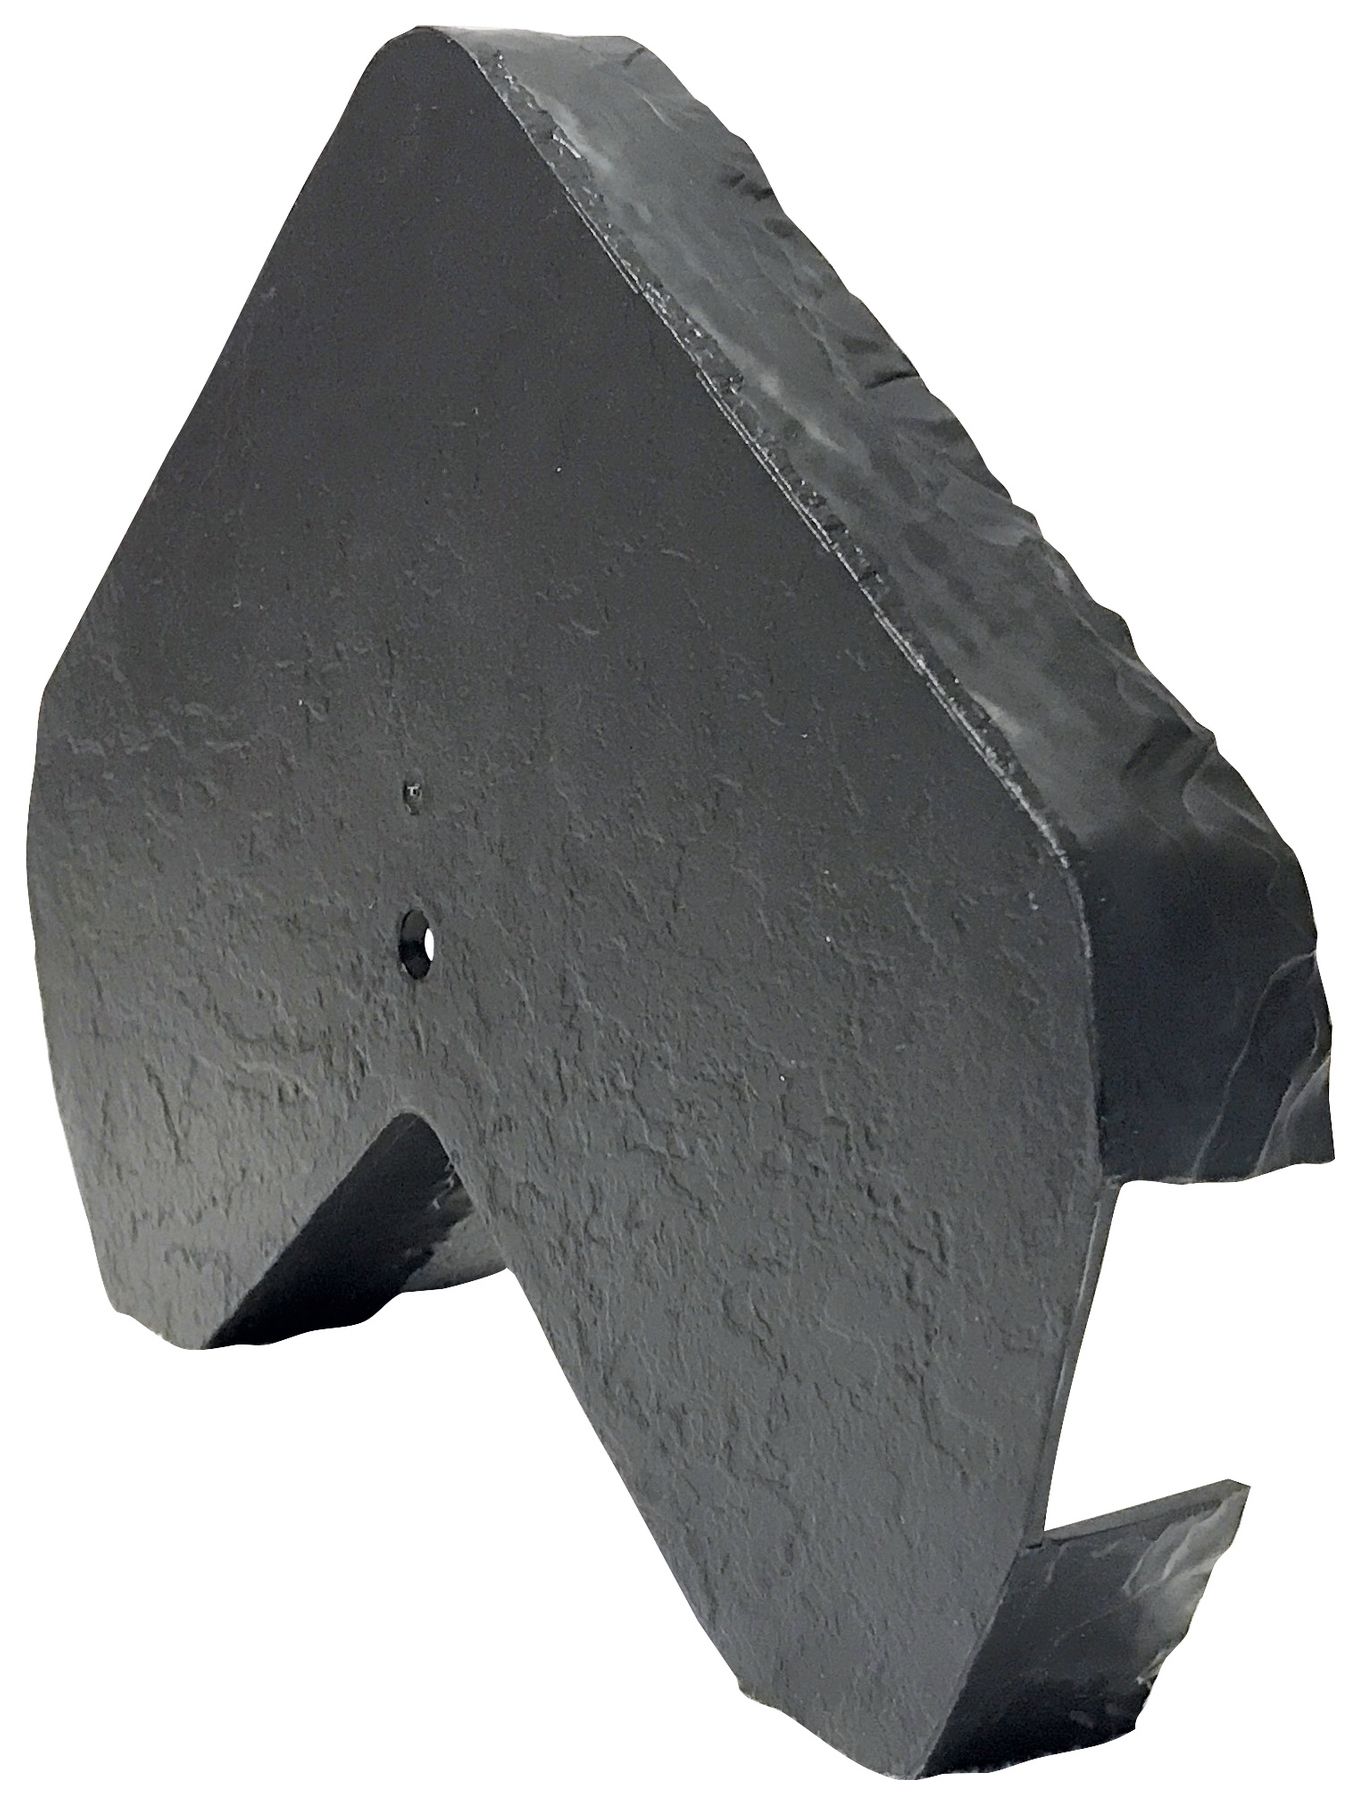 Image of Envirotile Plastic Lightweight Anthracite Gable End Cap - 28 x 325 x 6mm